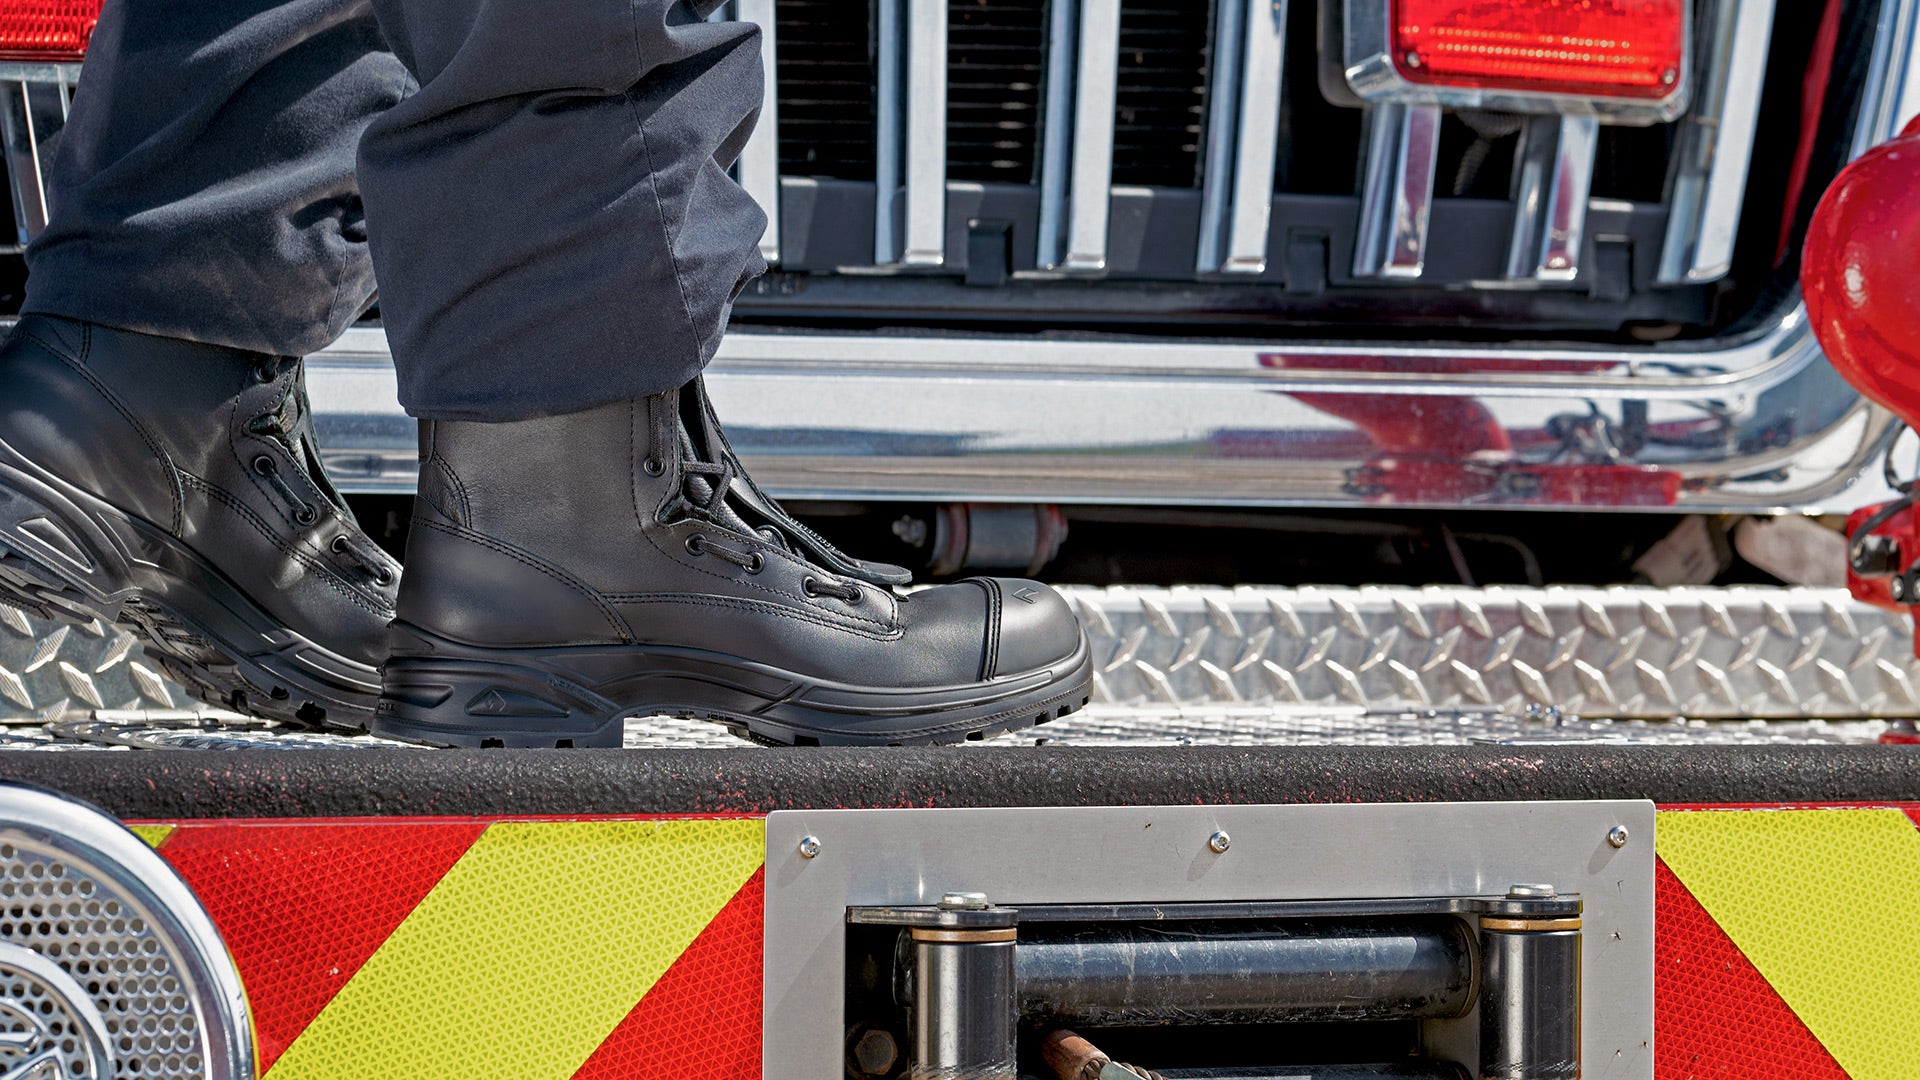 HAIX Airpower XR1 Pro Boot (605128) | Fire Store | Fuego Fire Center | Firefighter Gear | Developed with first responders in mind, these wildland, EMS, and USAR boots can take you to the front line and back with the comfort you need when logging long hours on your feet. A multi-purpose leather boot that is NFPA certified, you have the convenience of three boots in one. Wear it in the station, on EMS calls, to wildland brush fires, and Urban Search and Rescue deployments.